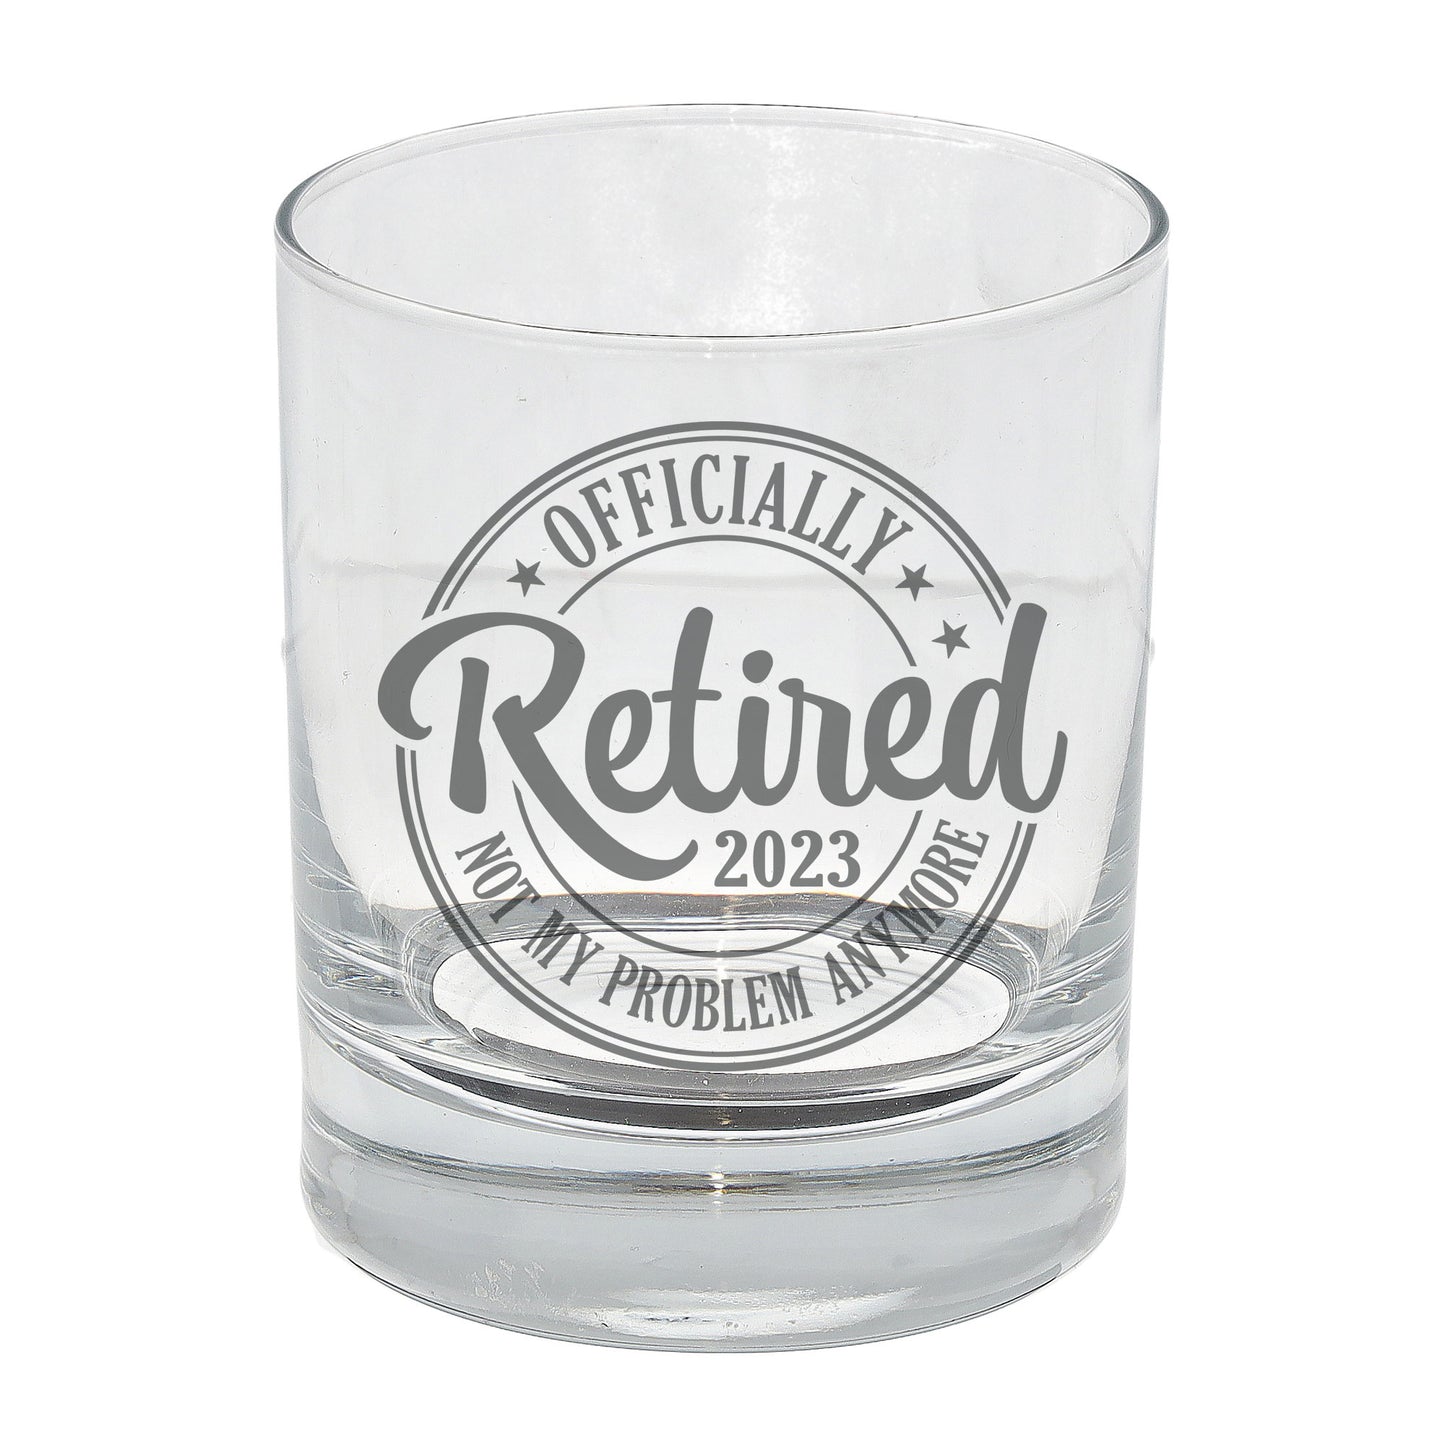 Officially Retired Engraved Whisky Glass and/or Coaster Set  - Always Looking Good - Whisky Glass Only  